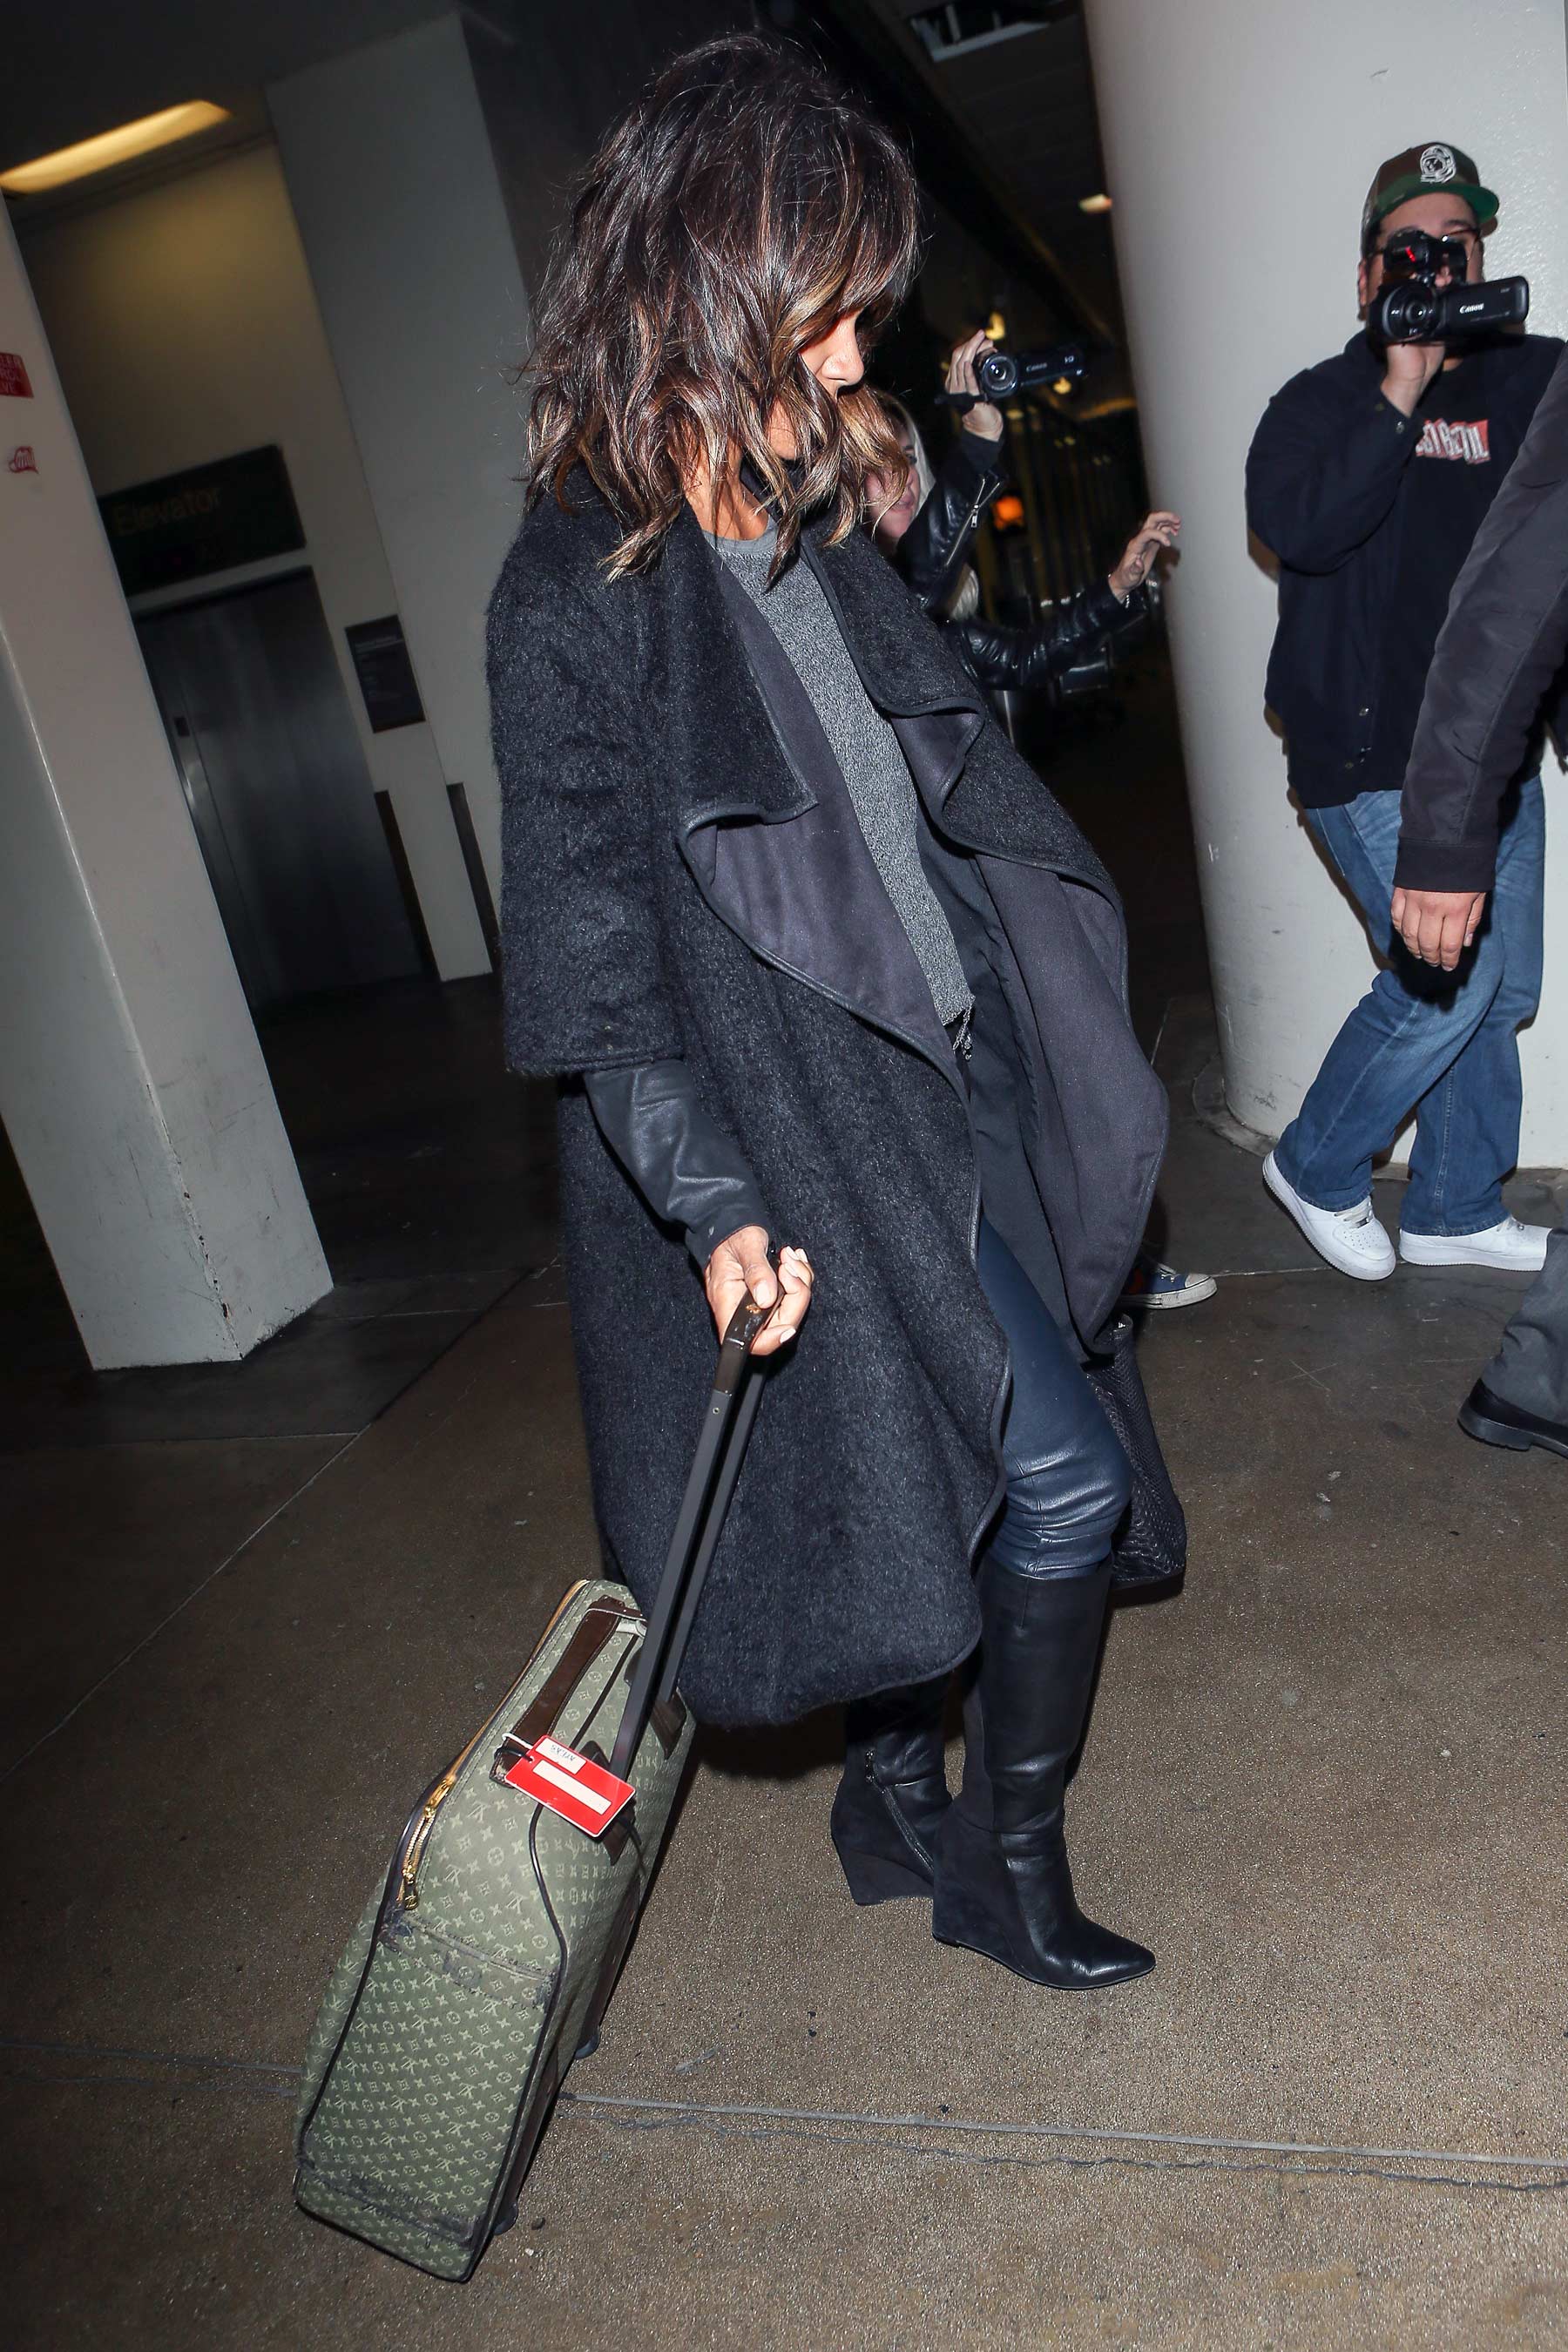 Halle Berry is seen arriving on a flight at LAX airport